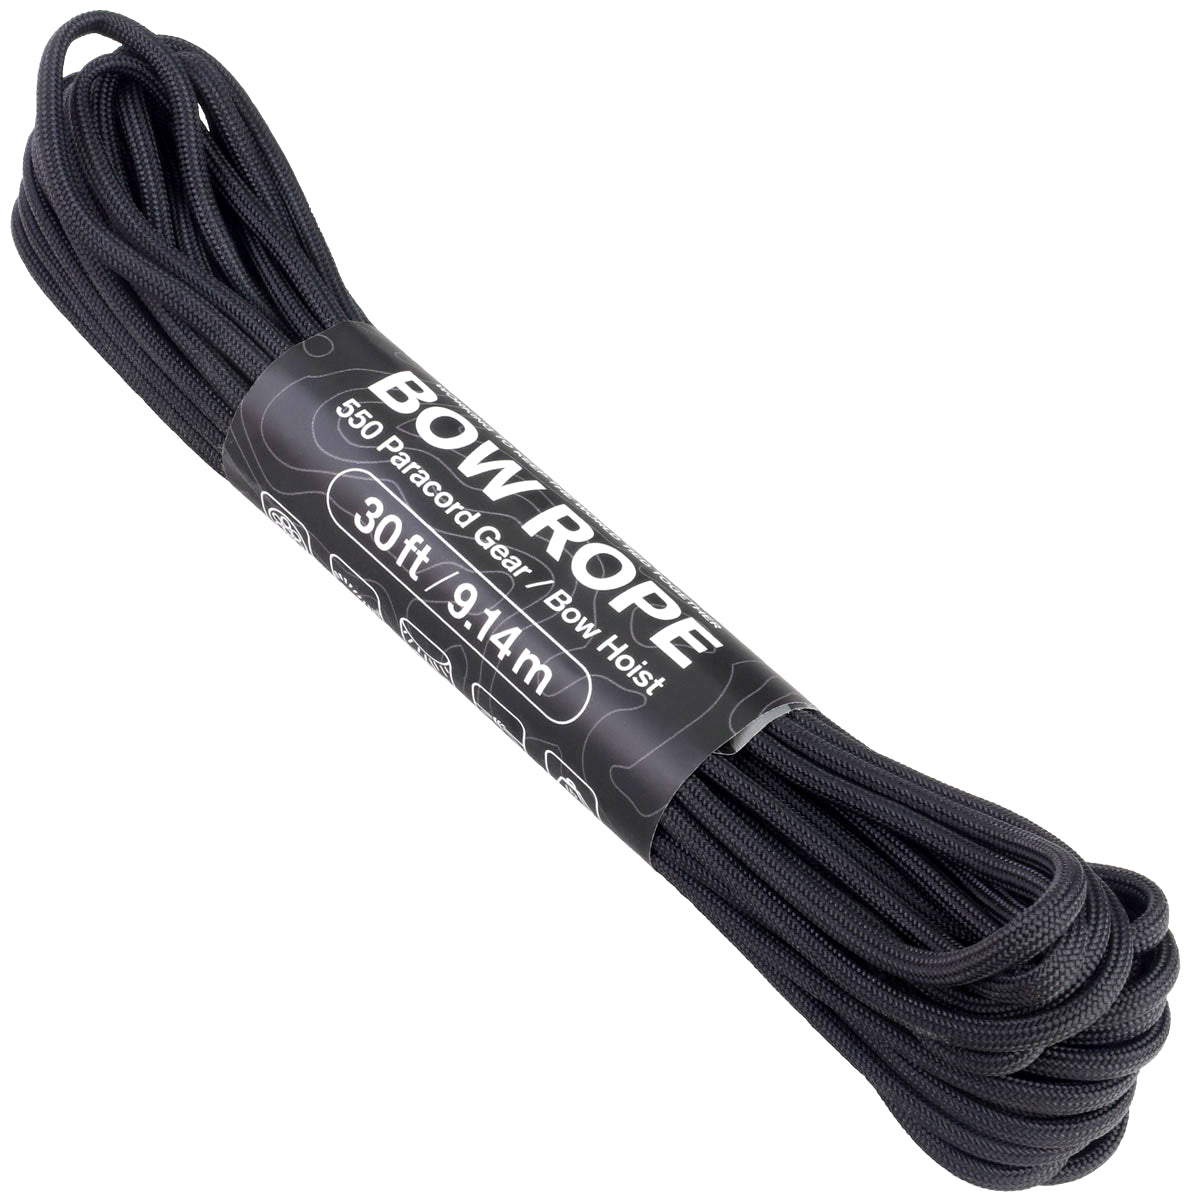 Bow Rope - 30ft 550 Paracord Black